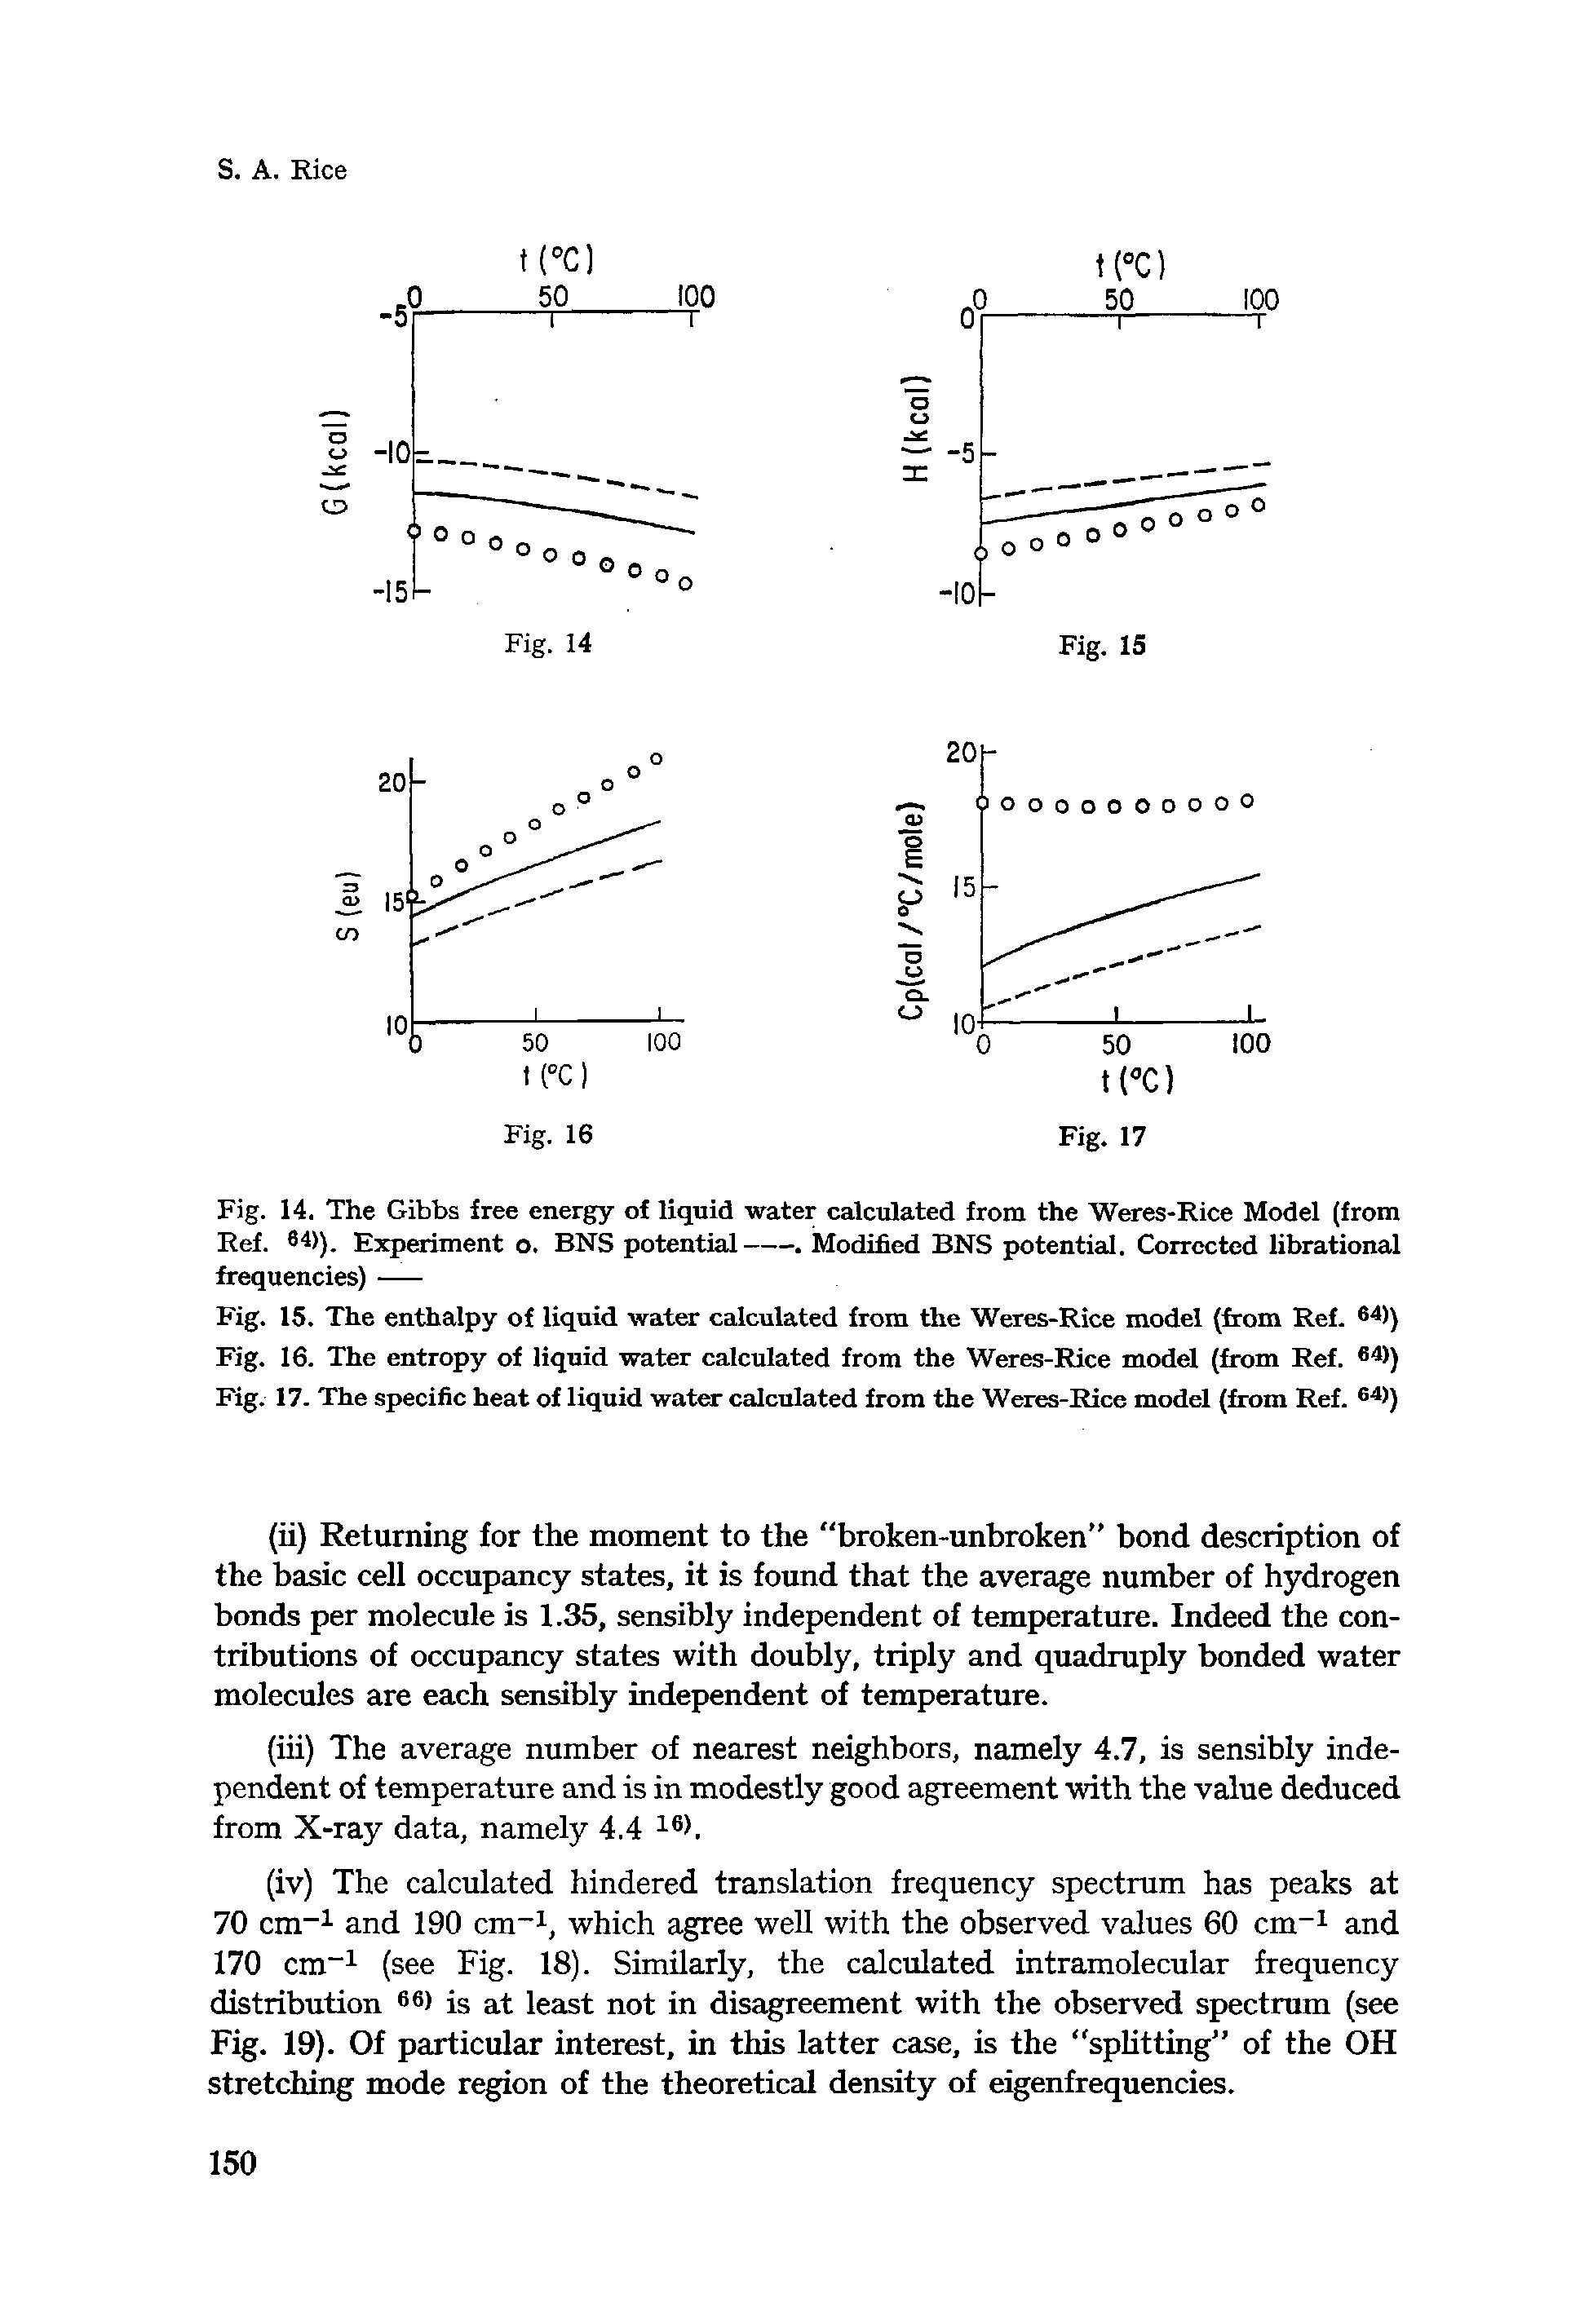 Fig. 15. The enthalpy of liquid water calculated from the Weres-Rice model (from Ref. 64>) Fig. 16. The entropy of liquid water calculated from the Weres-Rice model (from Ref. 84>) Fig. 17. The specific heat of liquid water calculated from the Weres-Rice model (from Ref. 64>)...